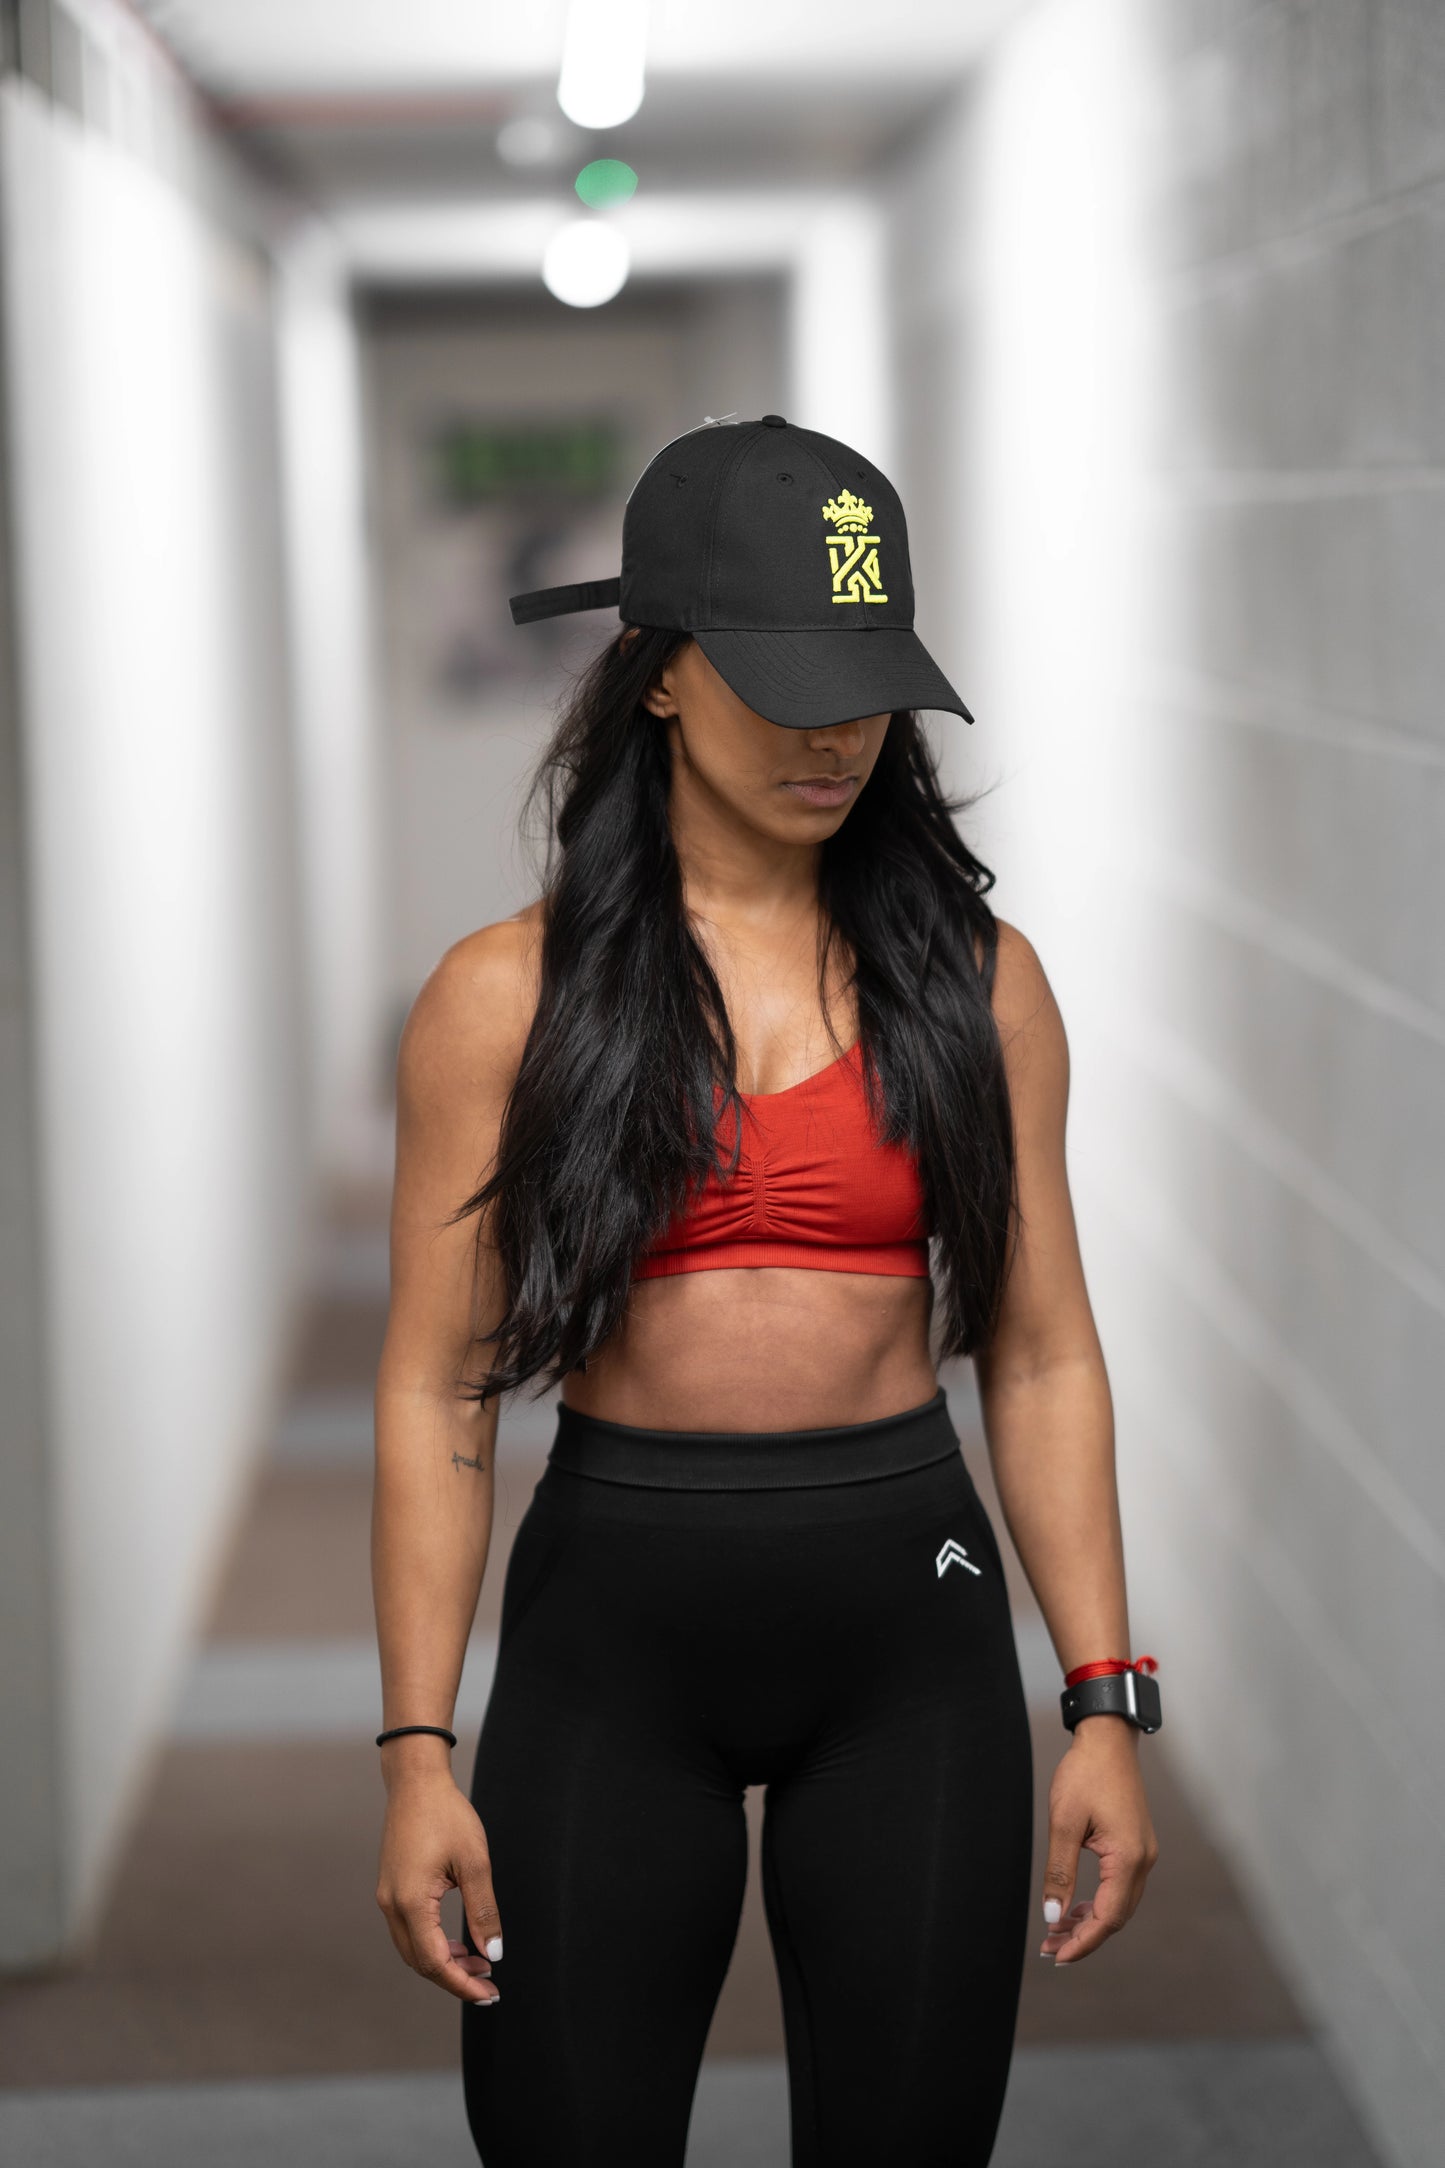 KingsGym Cool Green Cap On Lady